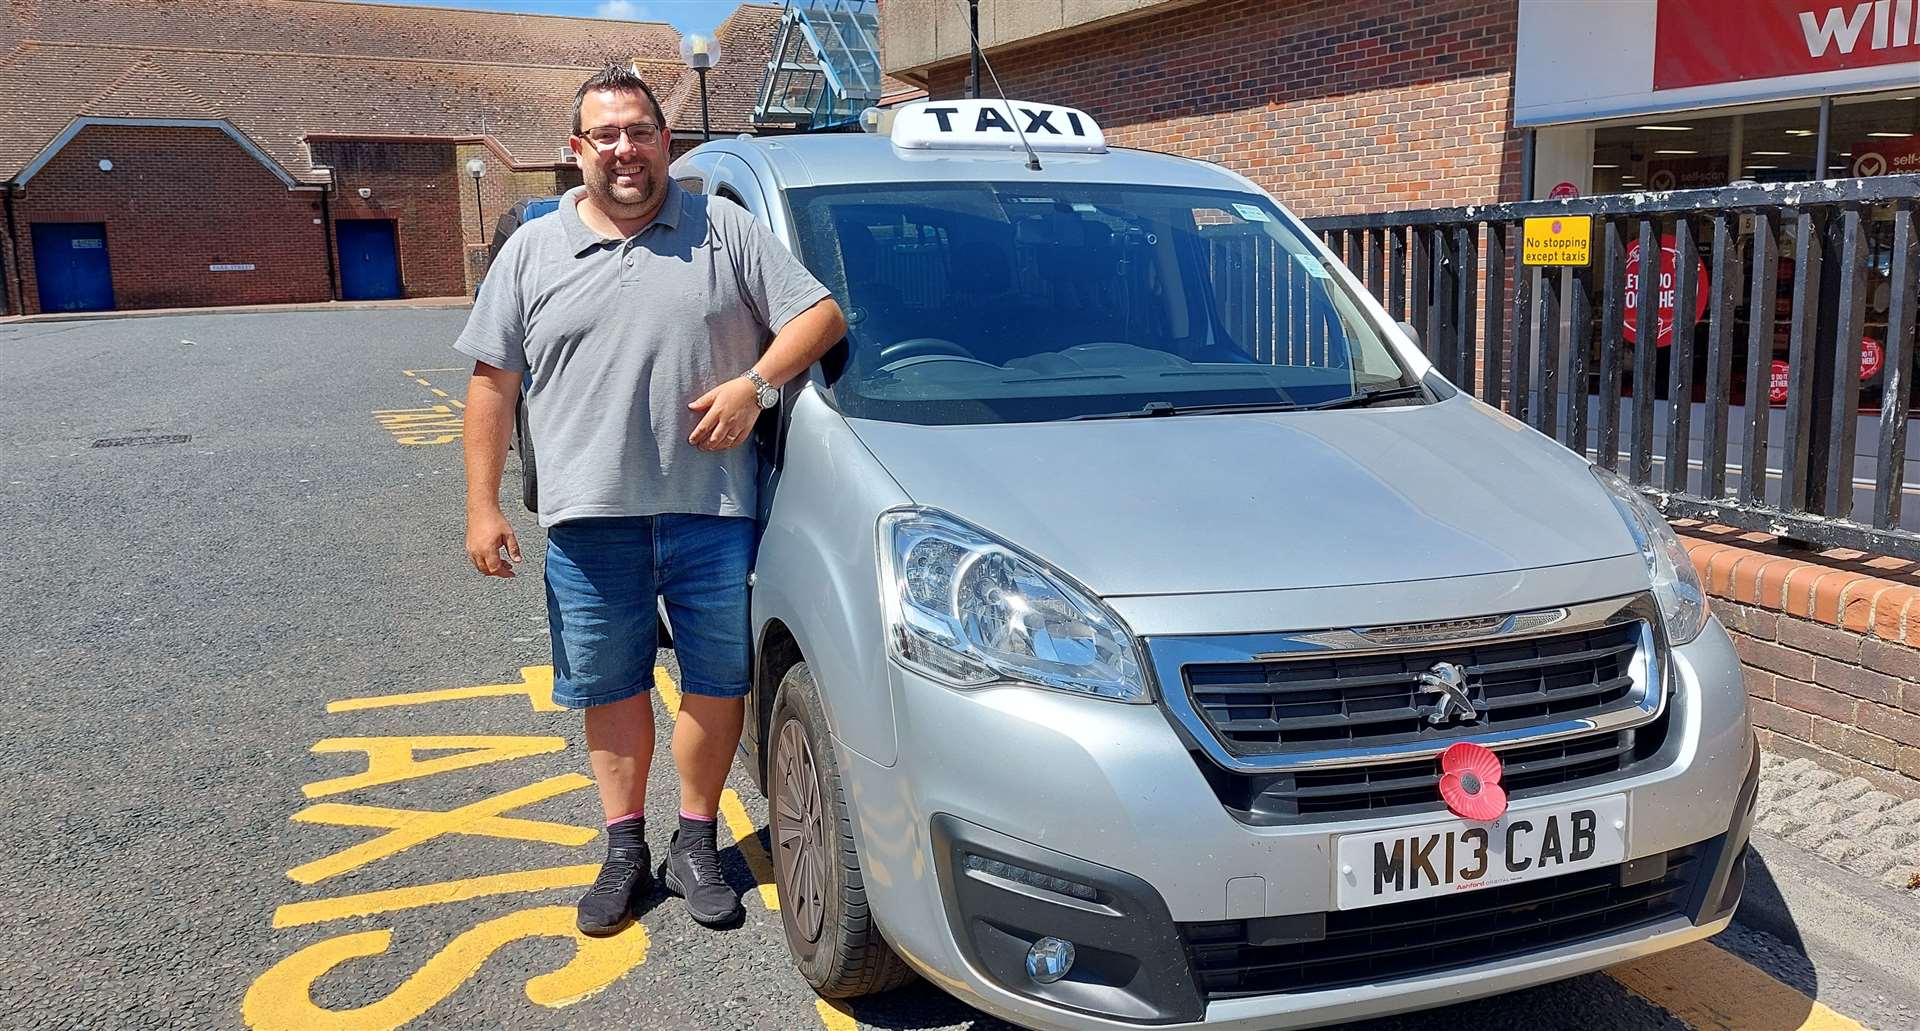 Mike Simkins started Mike's Taxi two years ago and is now expanding